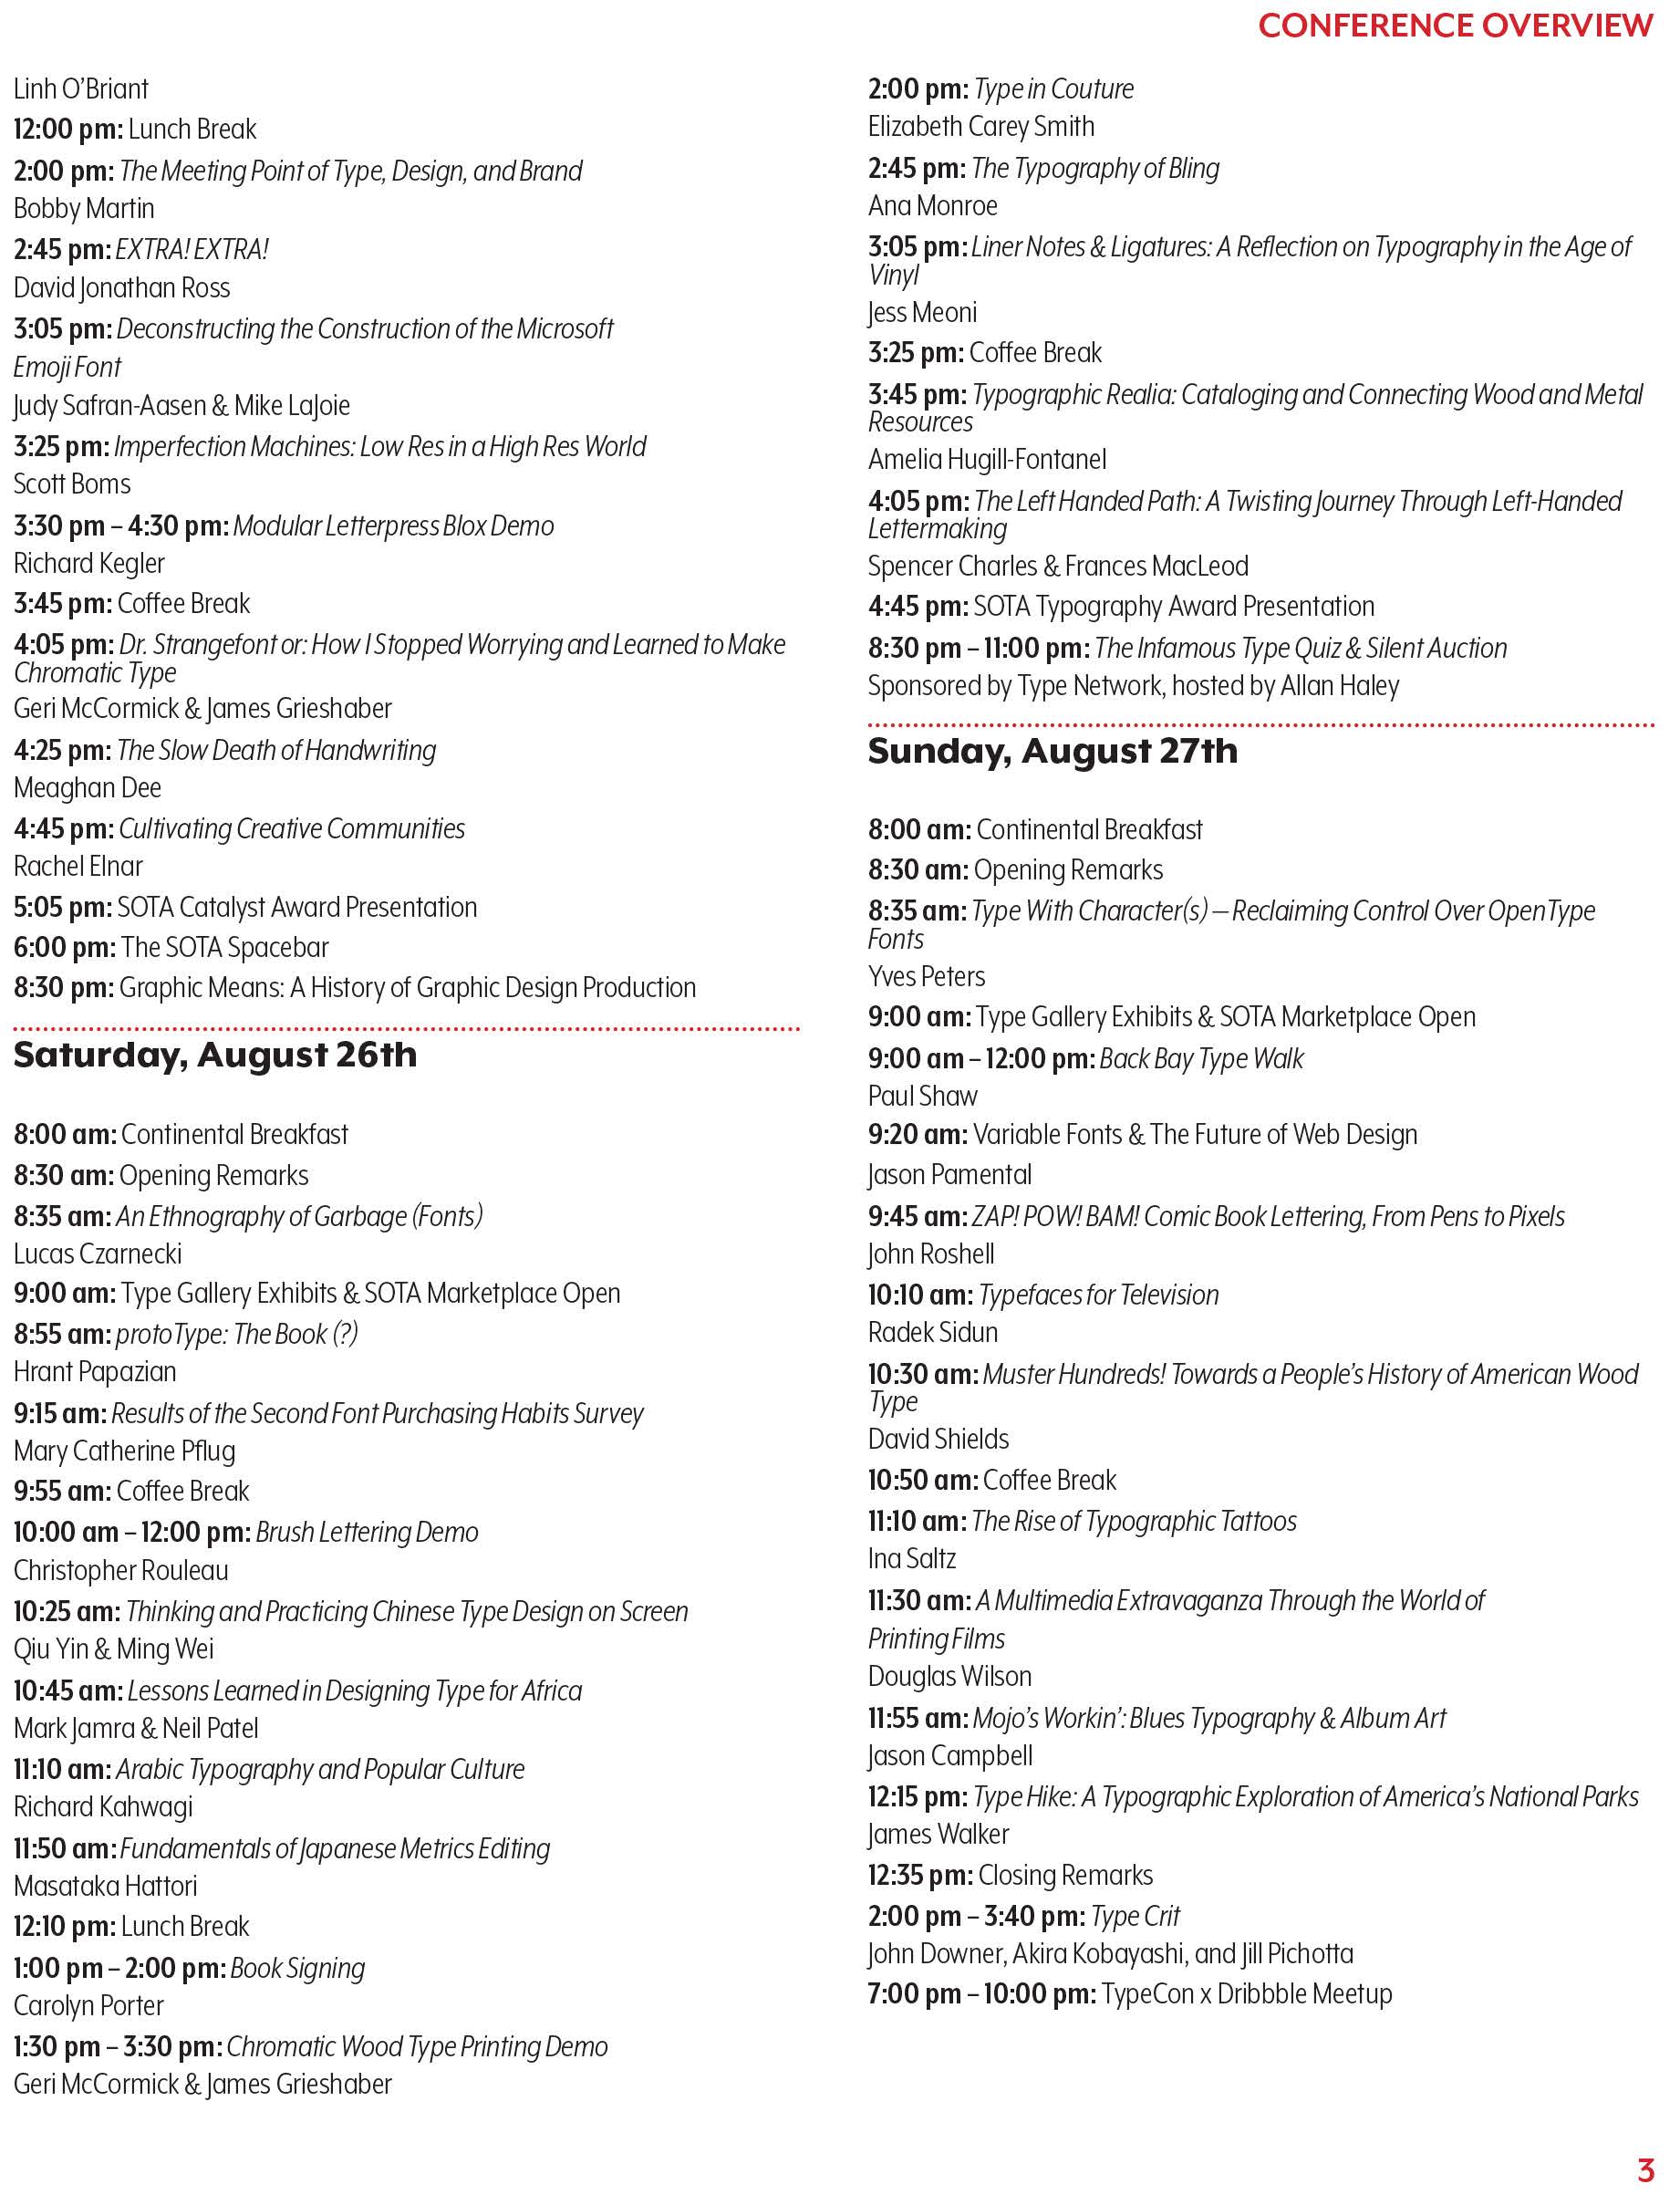 digital image of a page from the program, listing the events for two days of the conference in black and red text